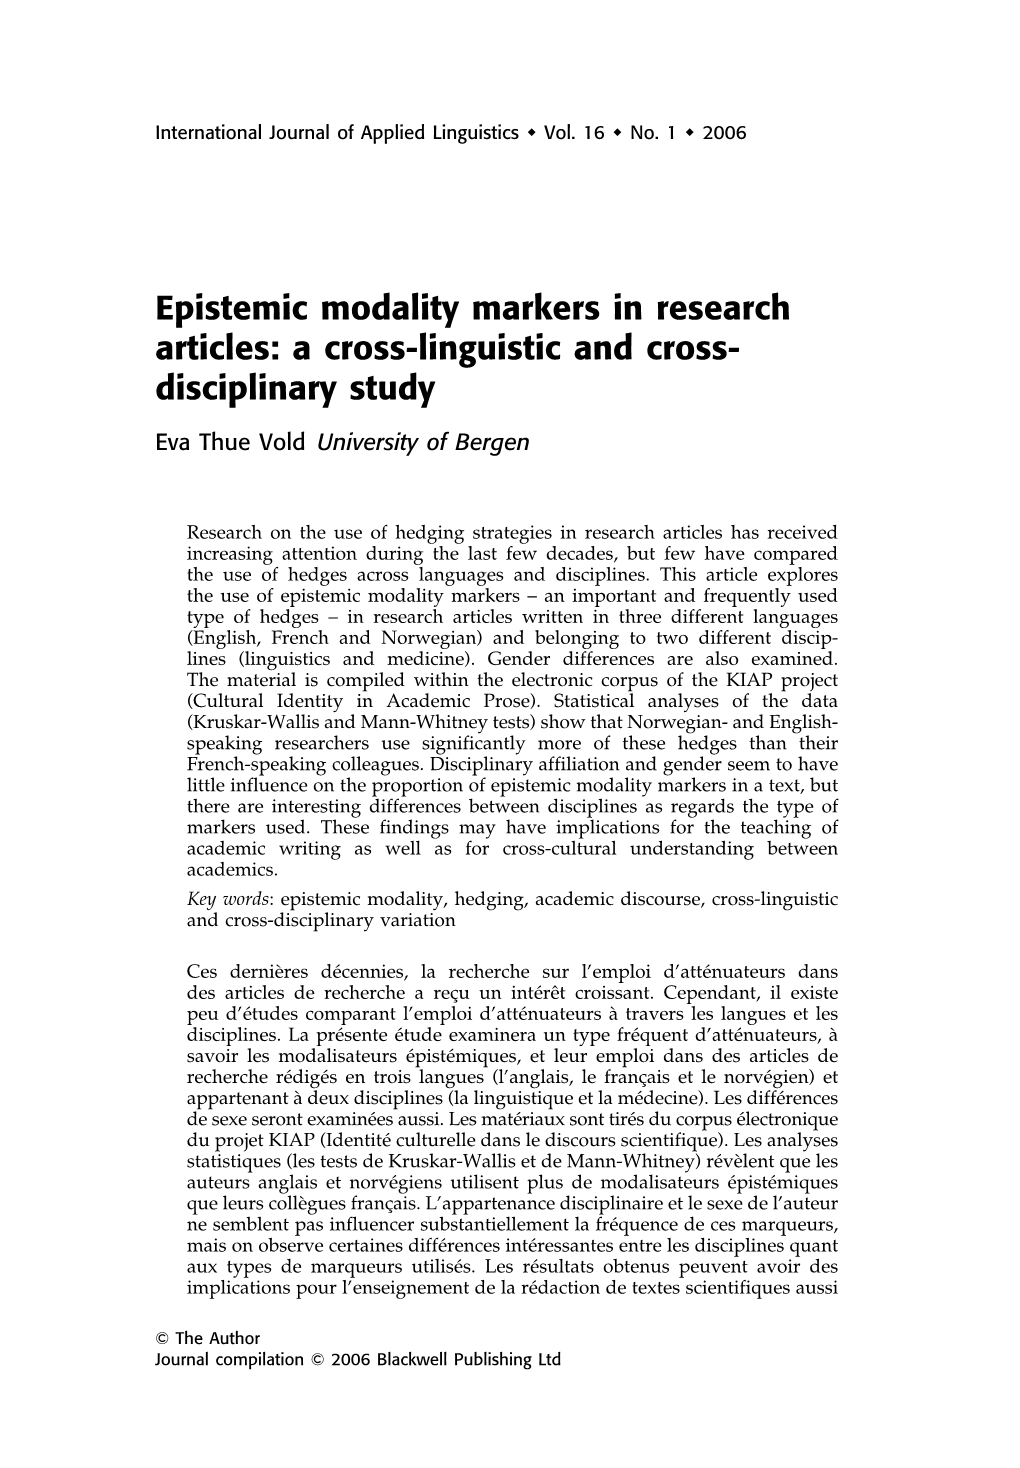 Epistemic Modality Markers in Research Articles: a Cross-Linguistic and Cross- Disciplinary Study